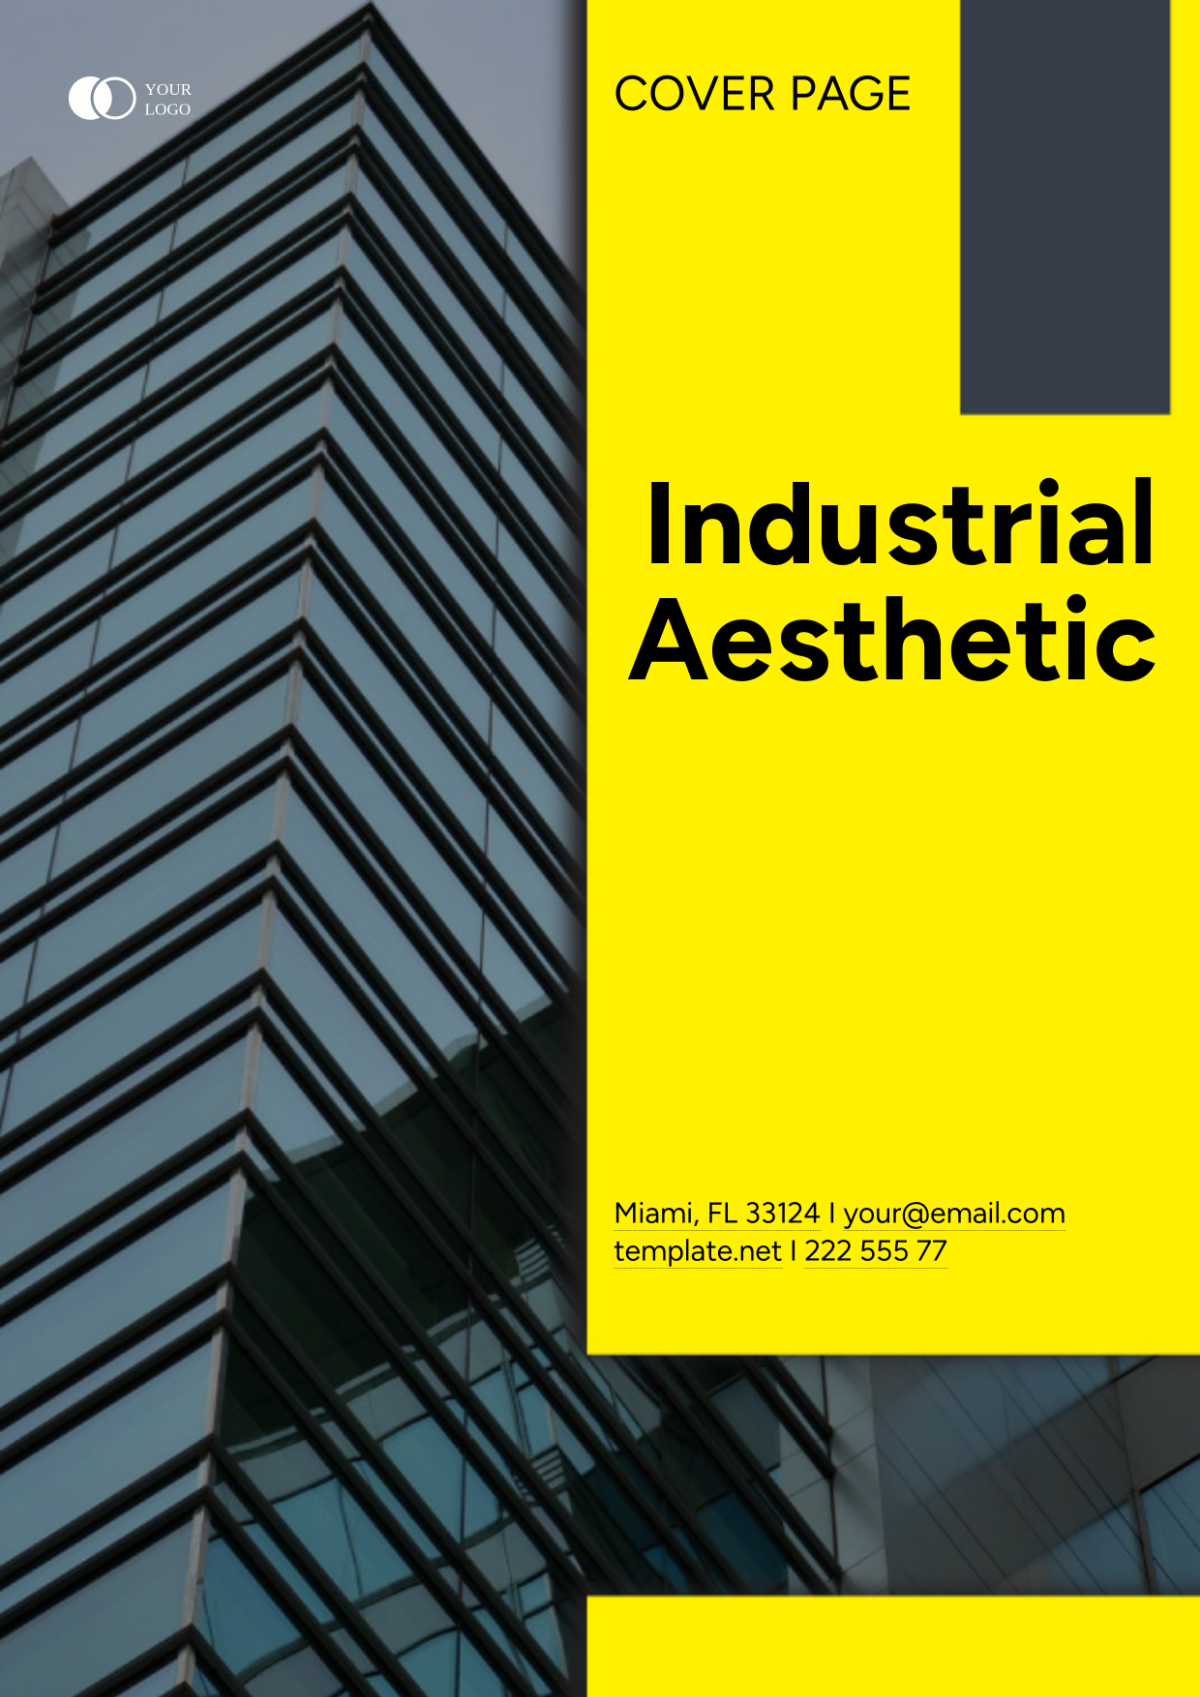 Industrial Aesthetic Cover Page Template